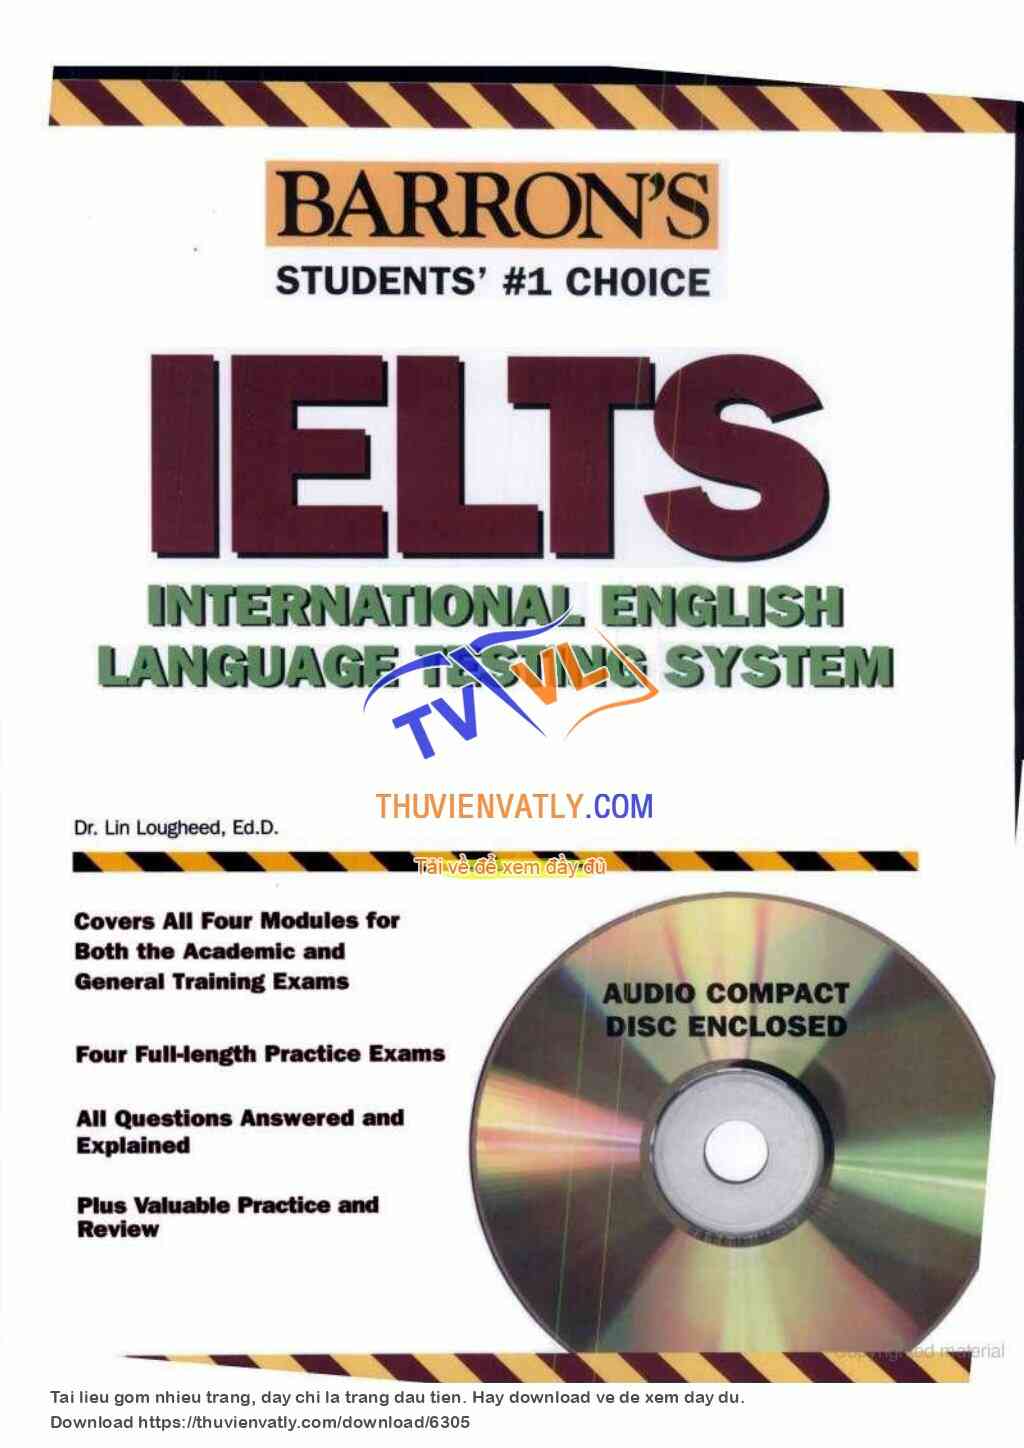 How to Prepare for the IELTS